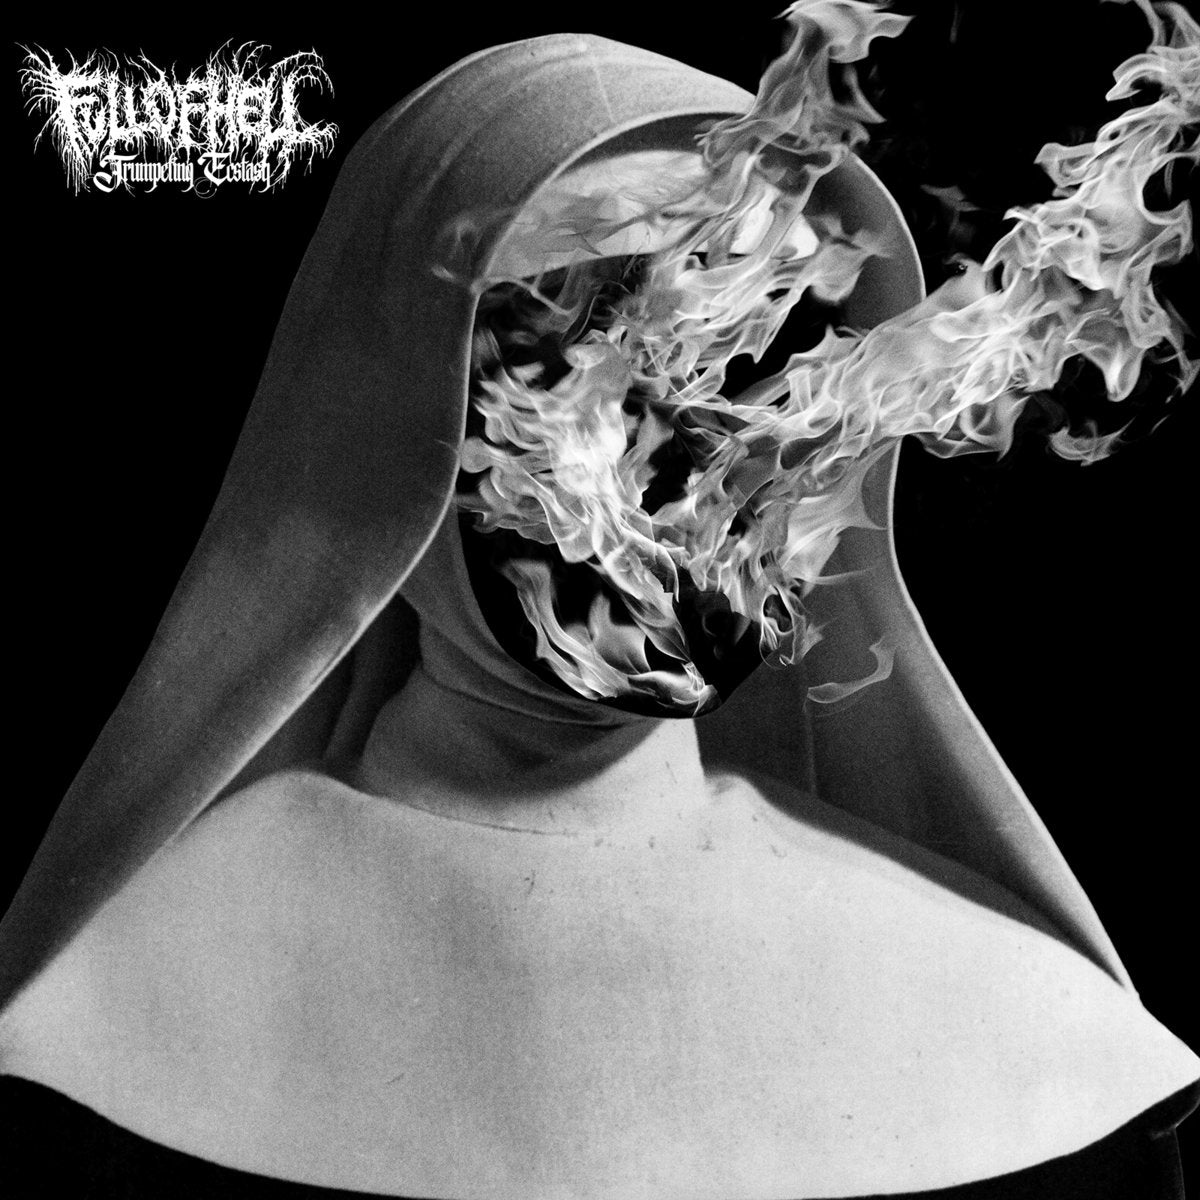 FULL OF HELL "Trumpeting Ecstasy" LP